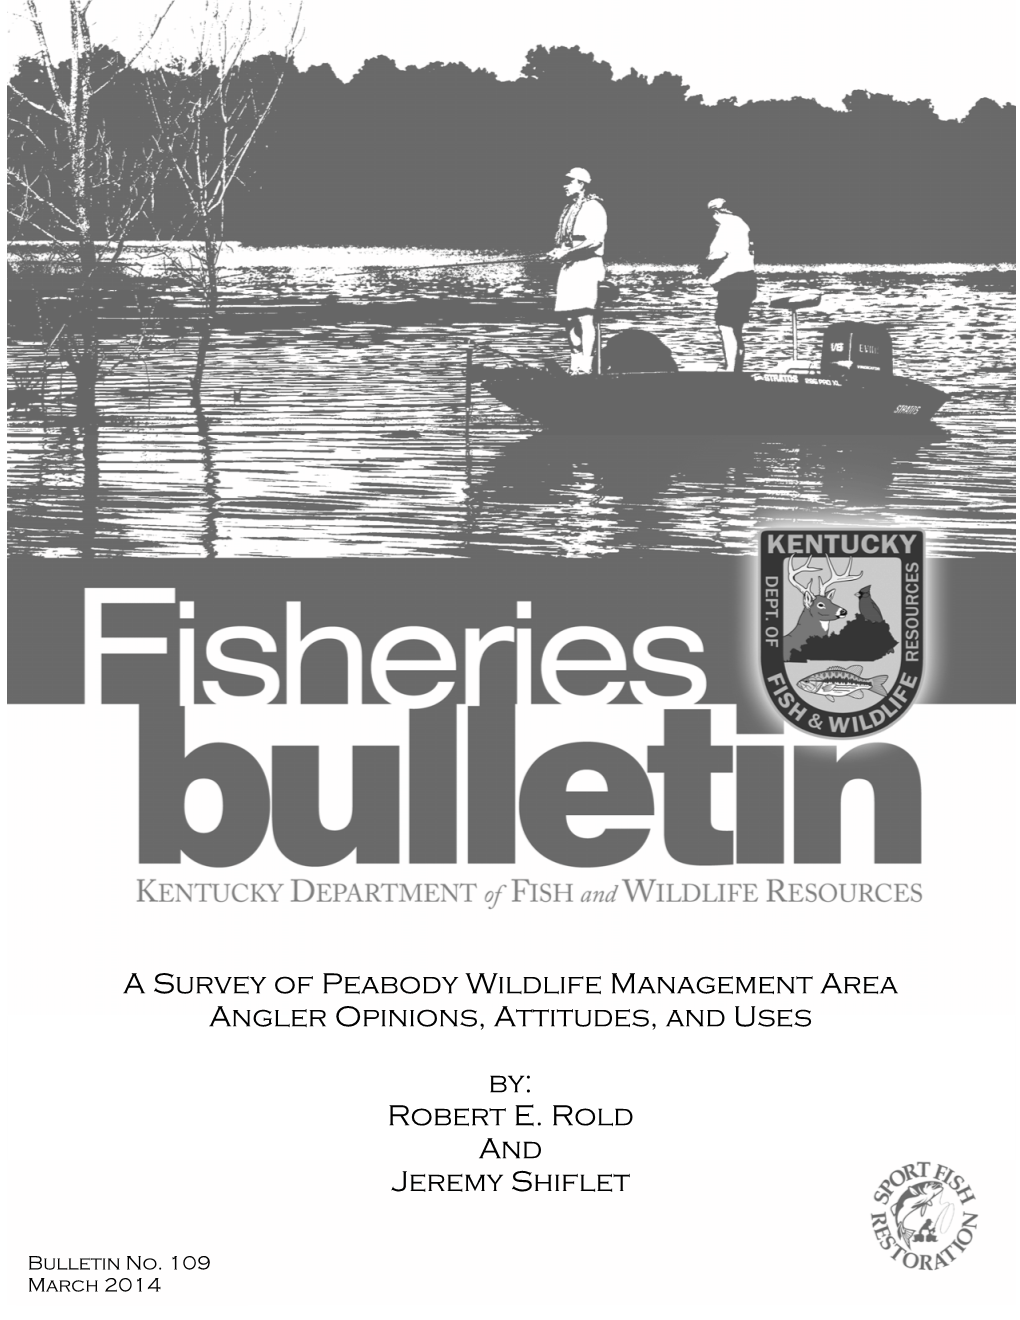 A Survey of Peabody Wildlife Management Area Angler Opinions, Attitudes, and Uses By: Robert E. Rold and Jeremy Shiflet